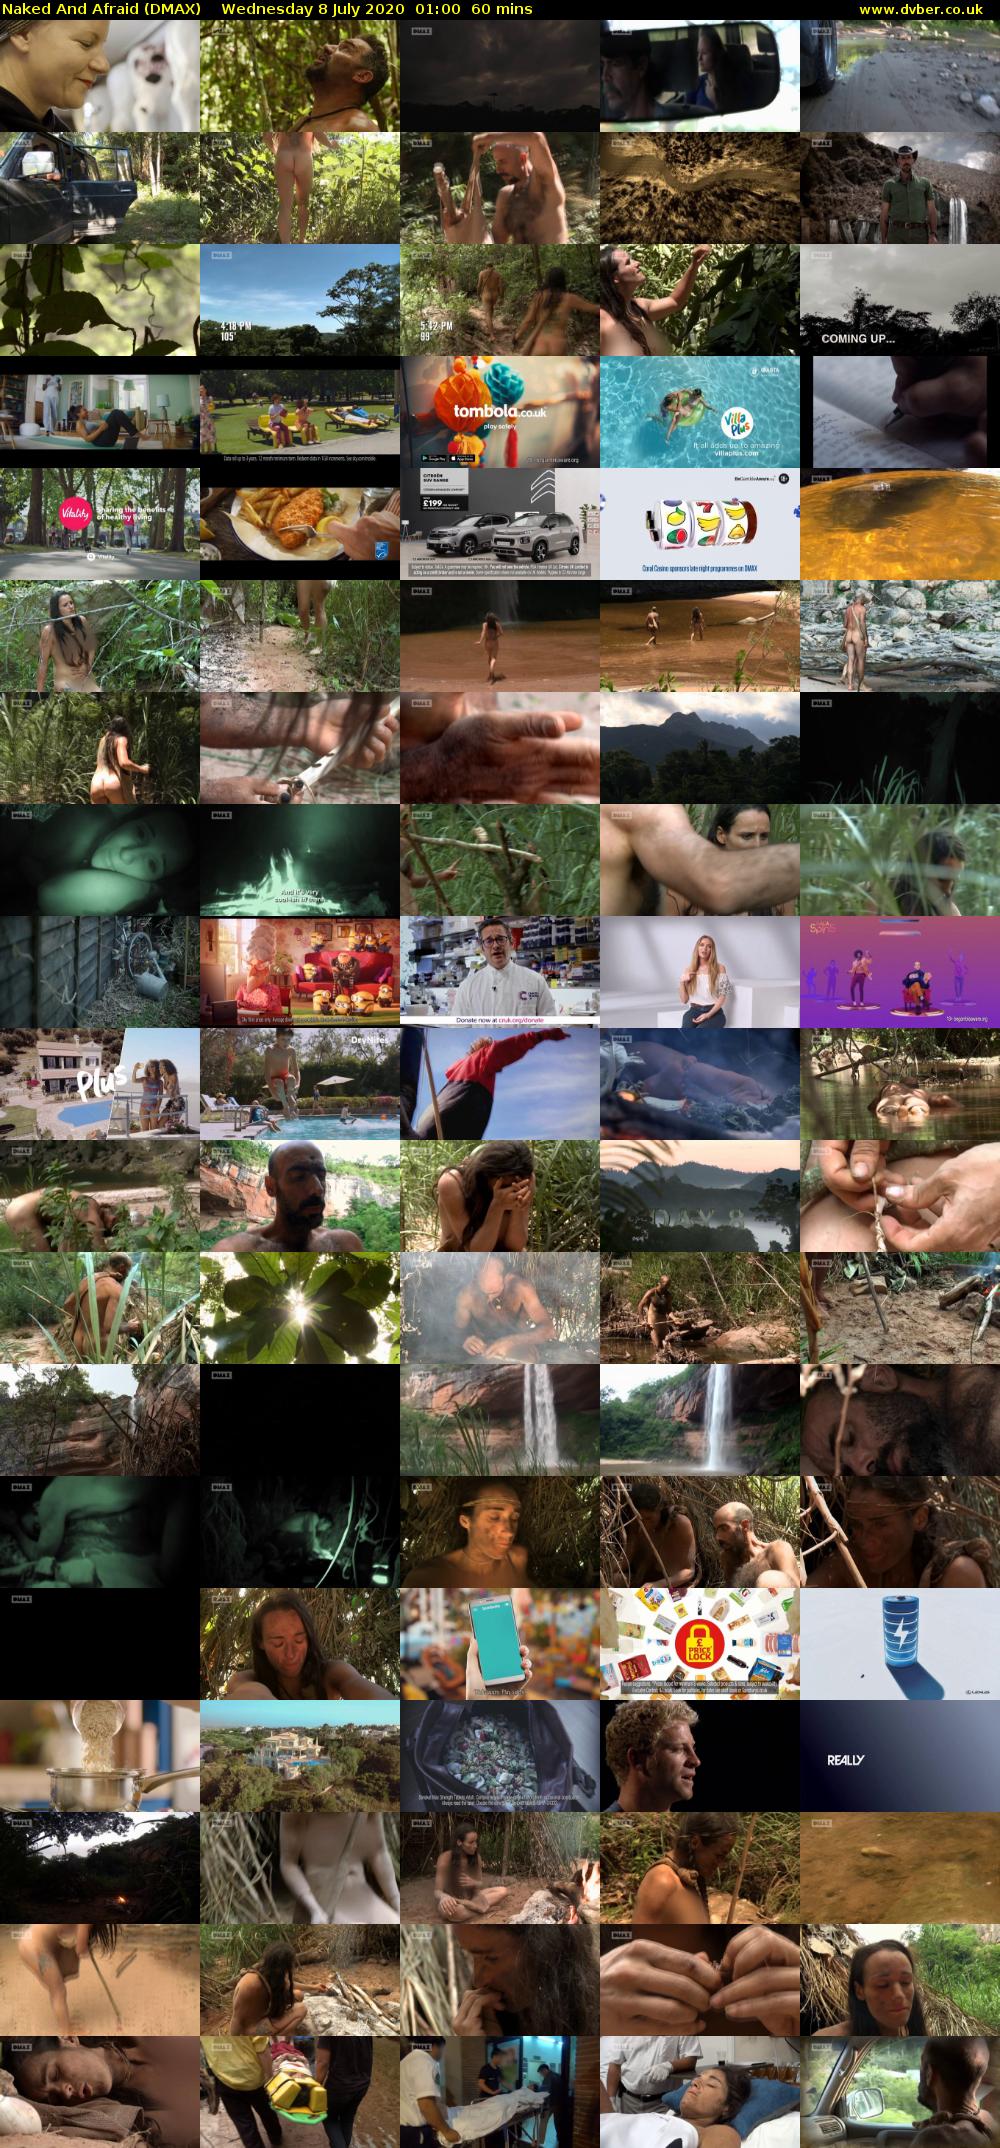 Naked And Afraid (DMAX) Wednesday 8 July 2020 01:00 - 02:00